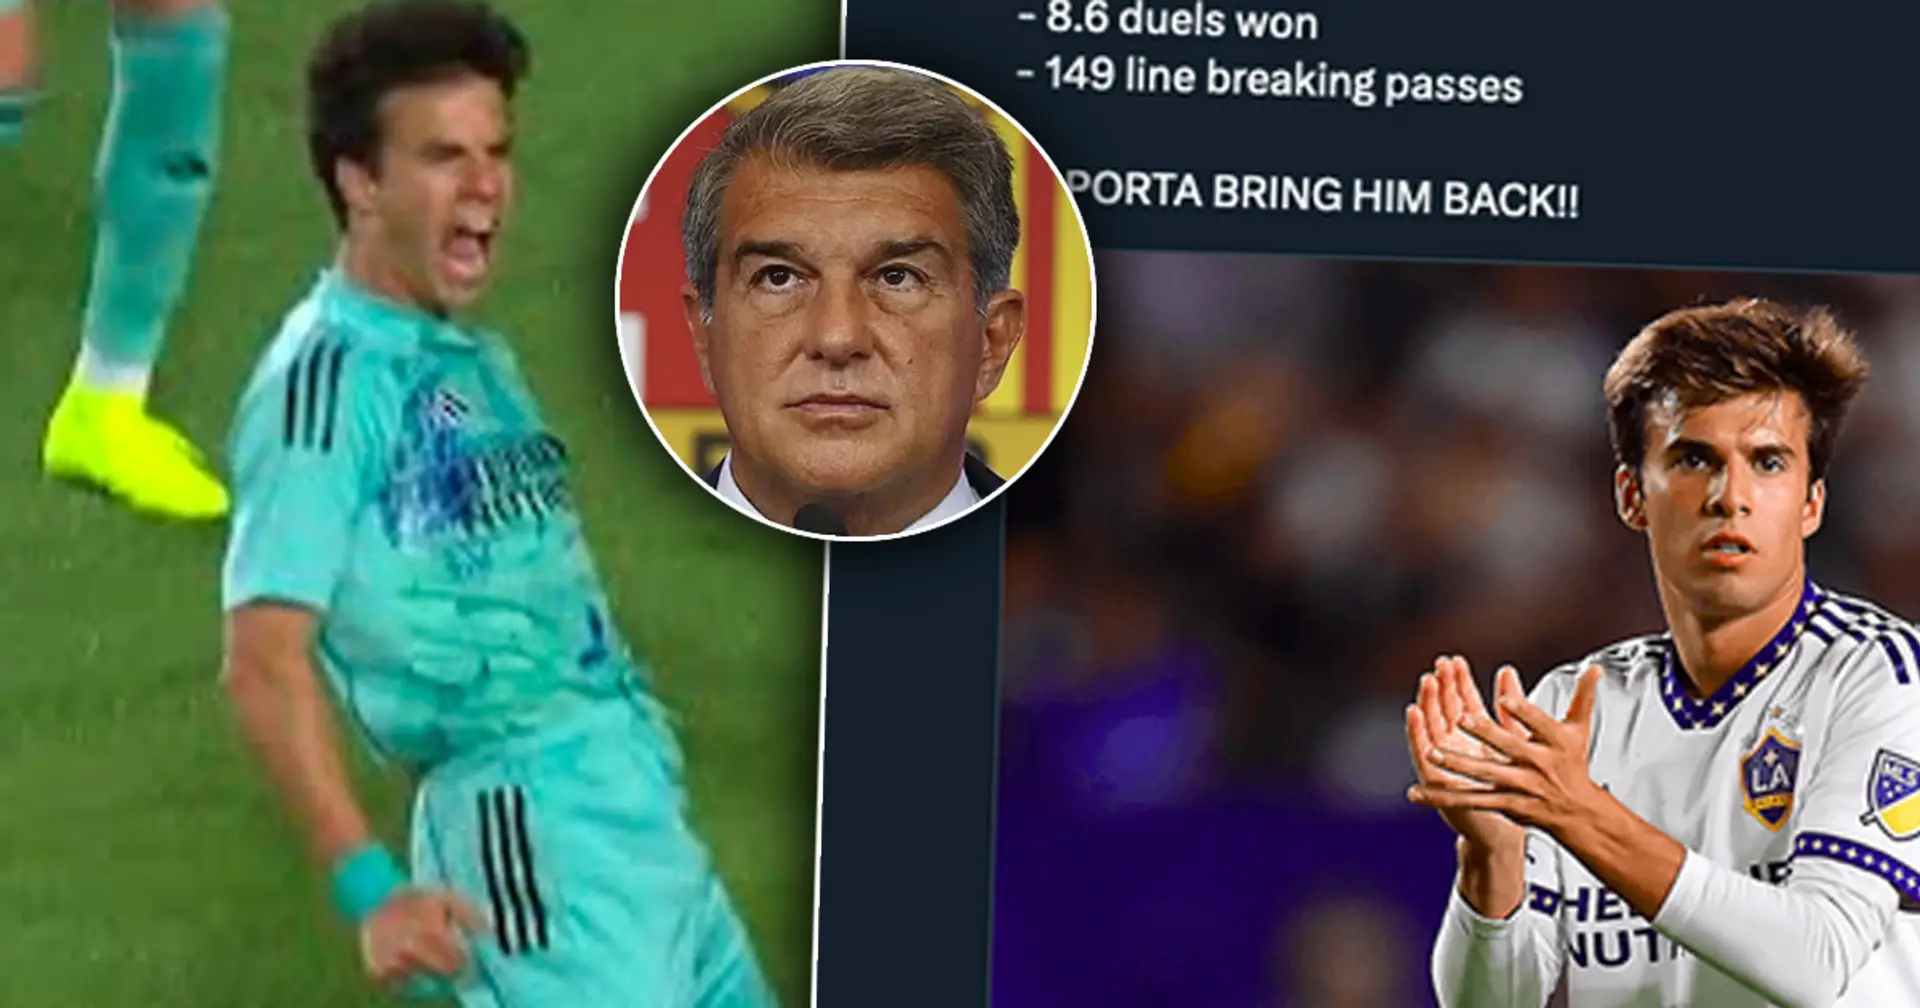 Spotted: Riqui Puig 'likes' tweet asking Laporta to bring him back to Barca